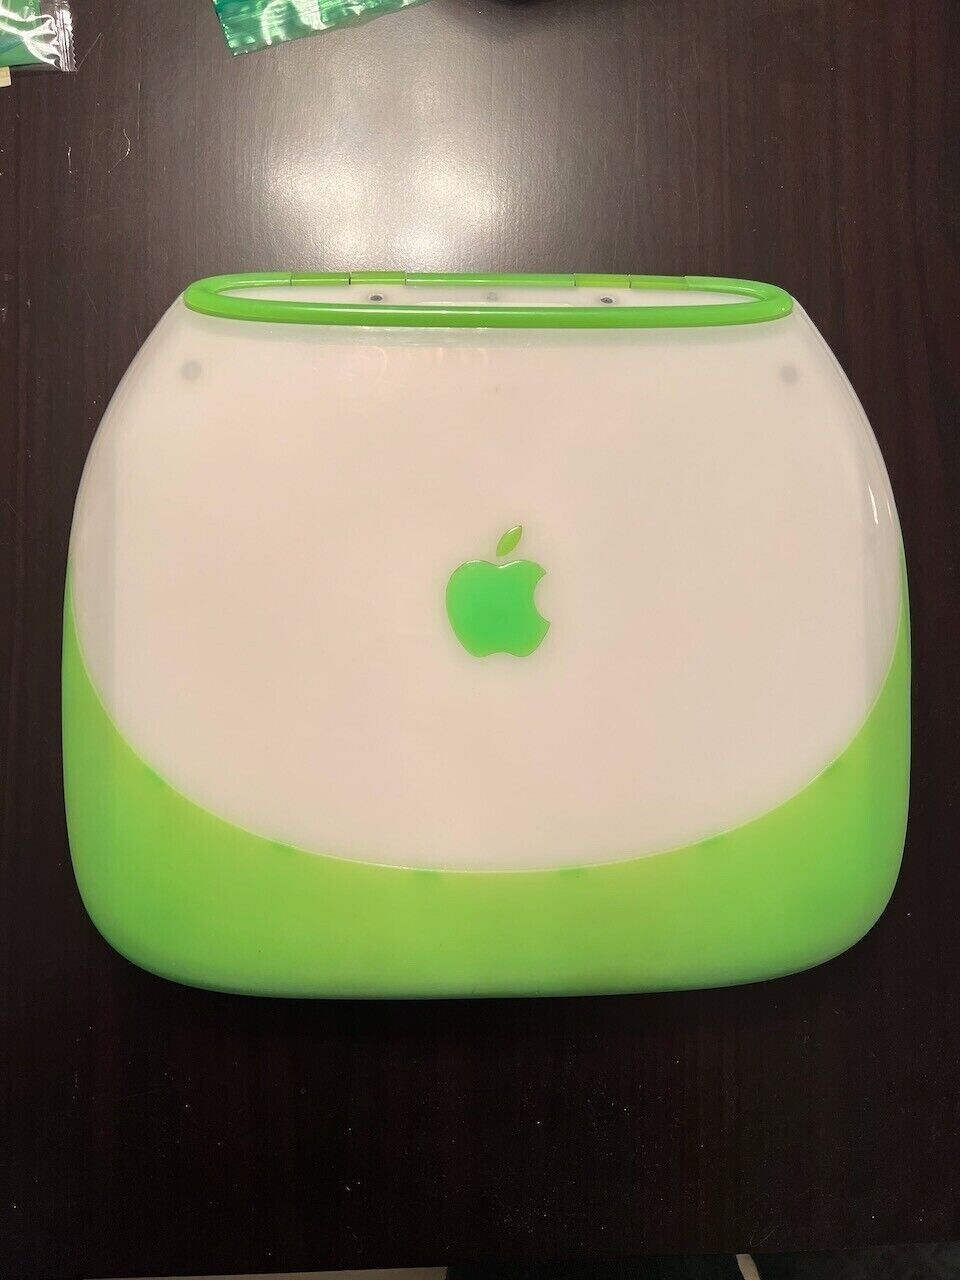 iBook Clamshell Key Lime Green 466mhz DVD FireWire 20GB HDD UPGRADED